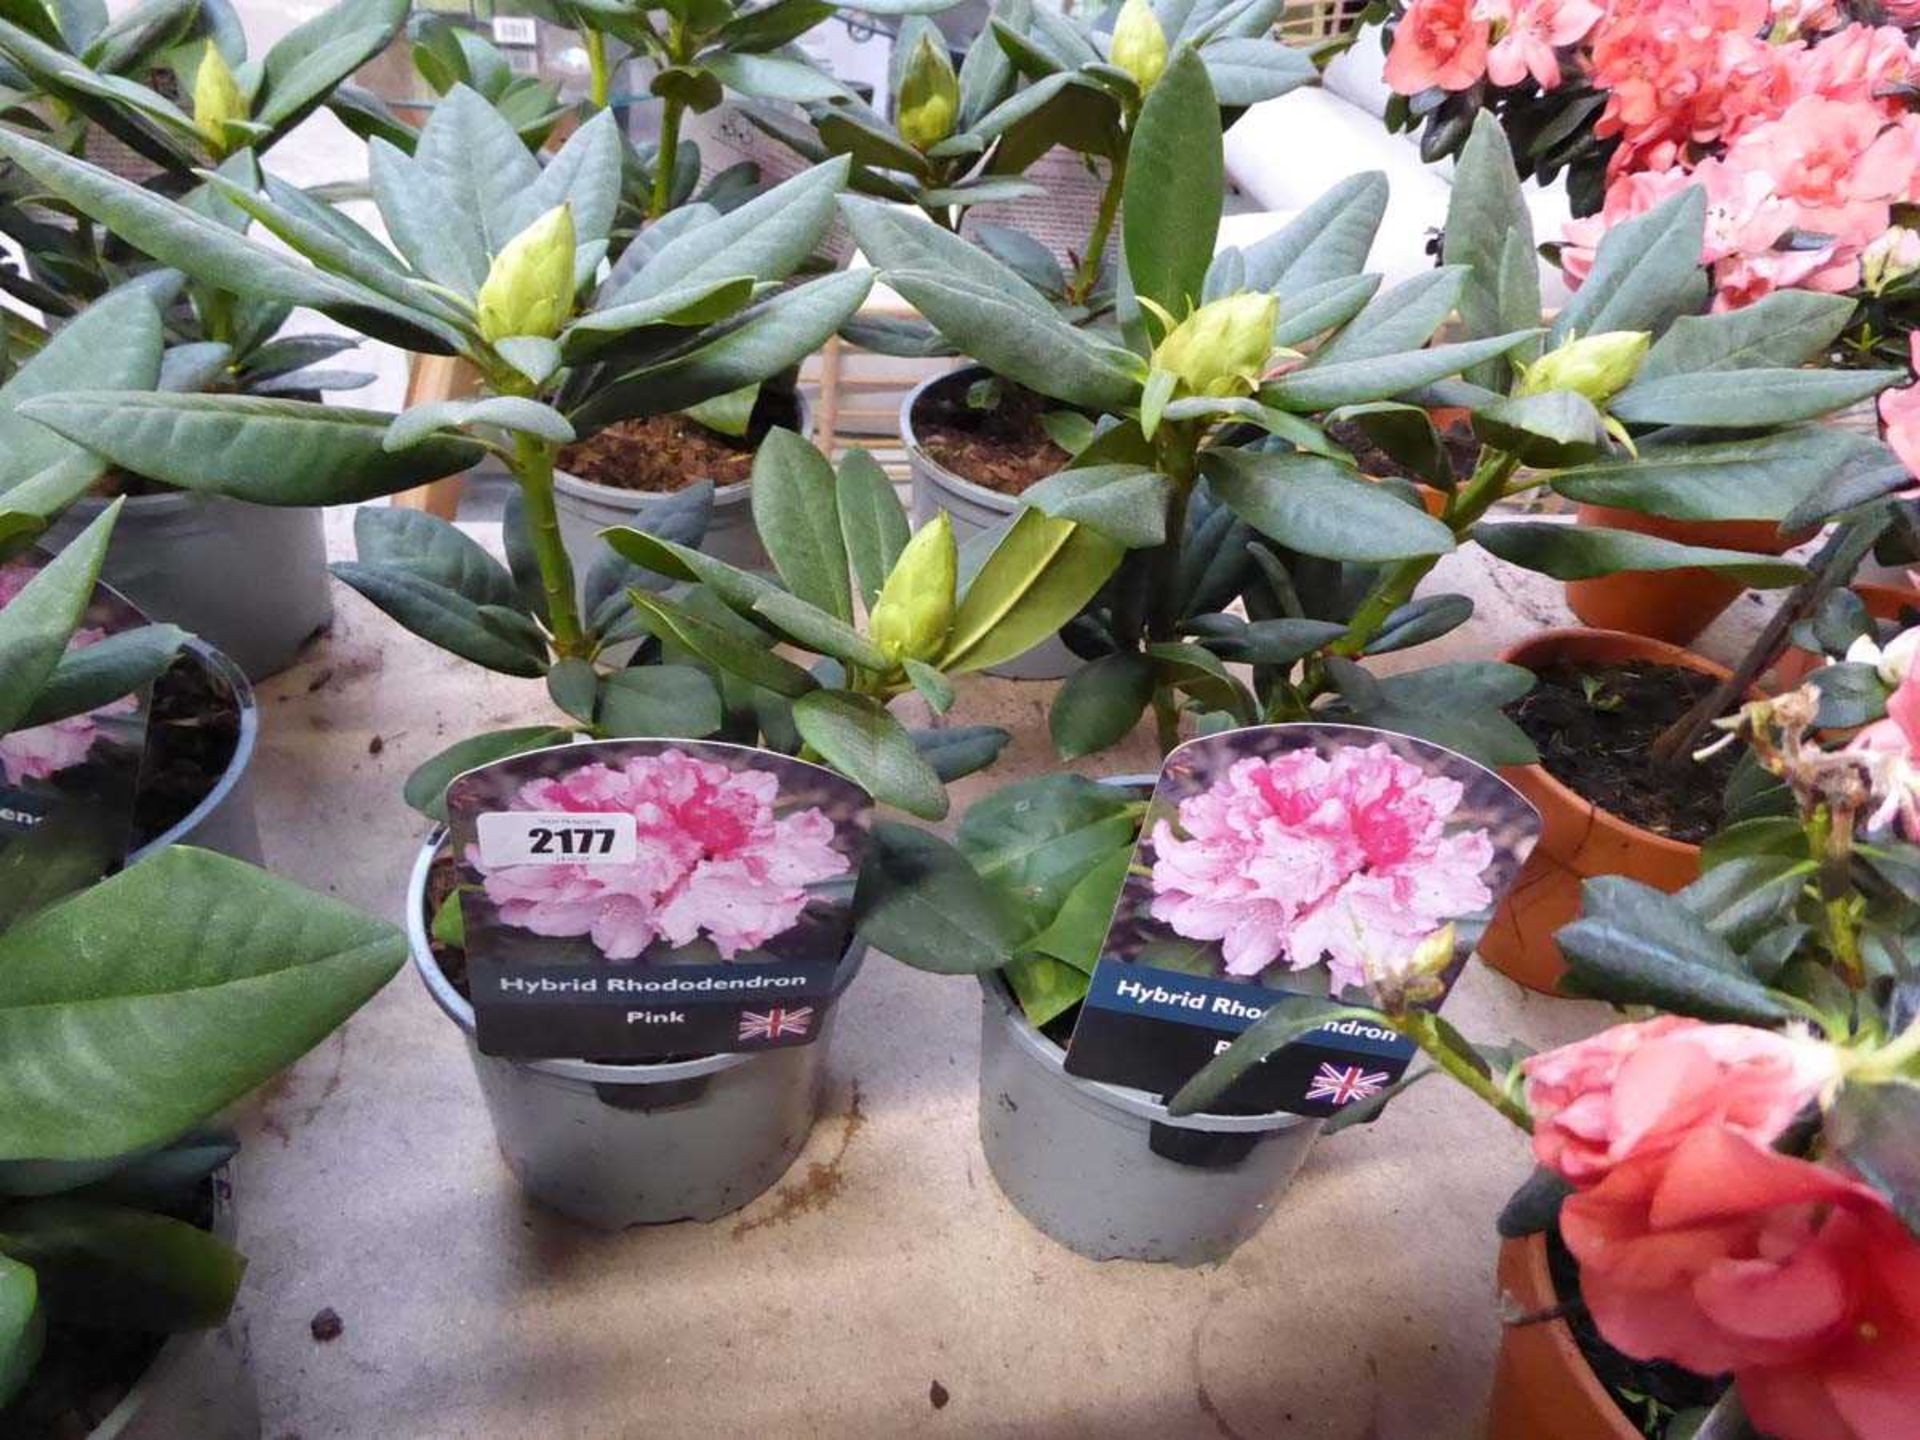 2 potted pink hybrid rhododendrons